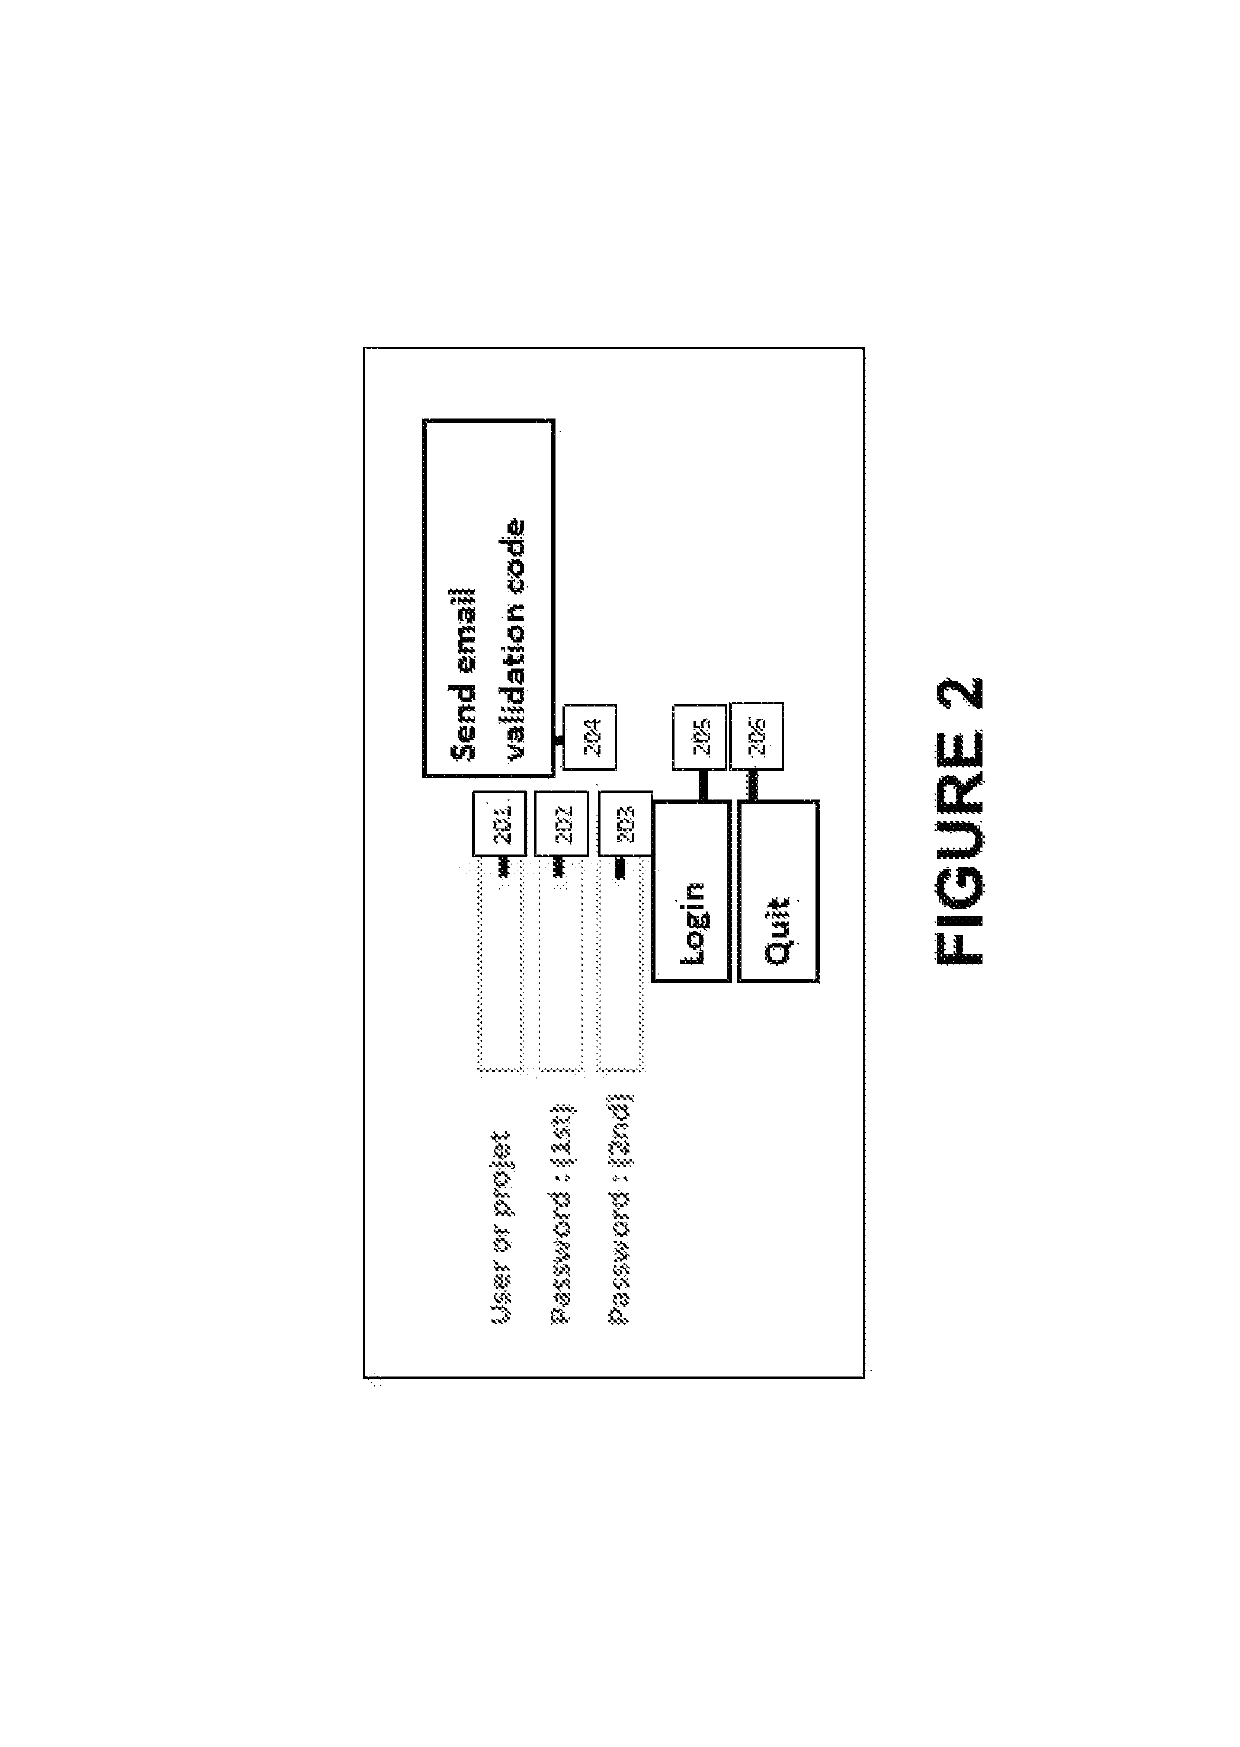 Method and system for securely updating a website